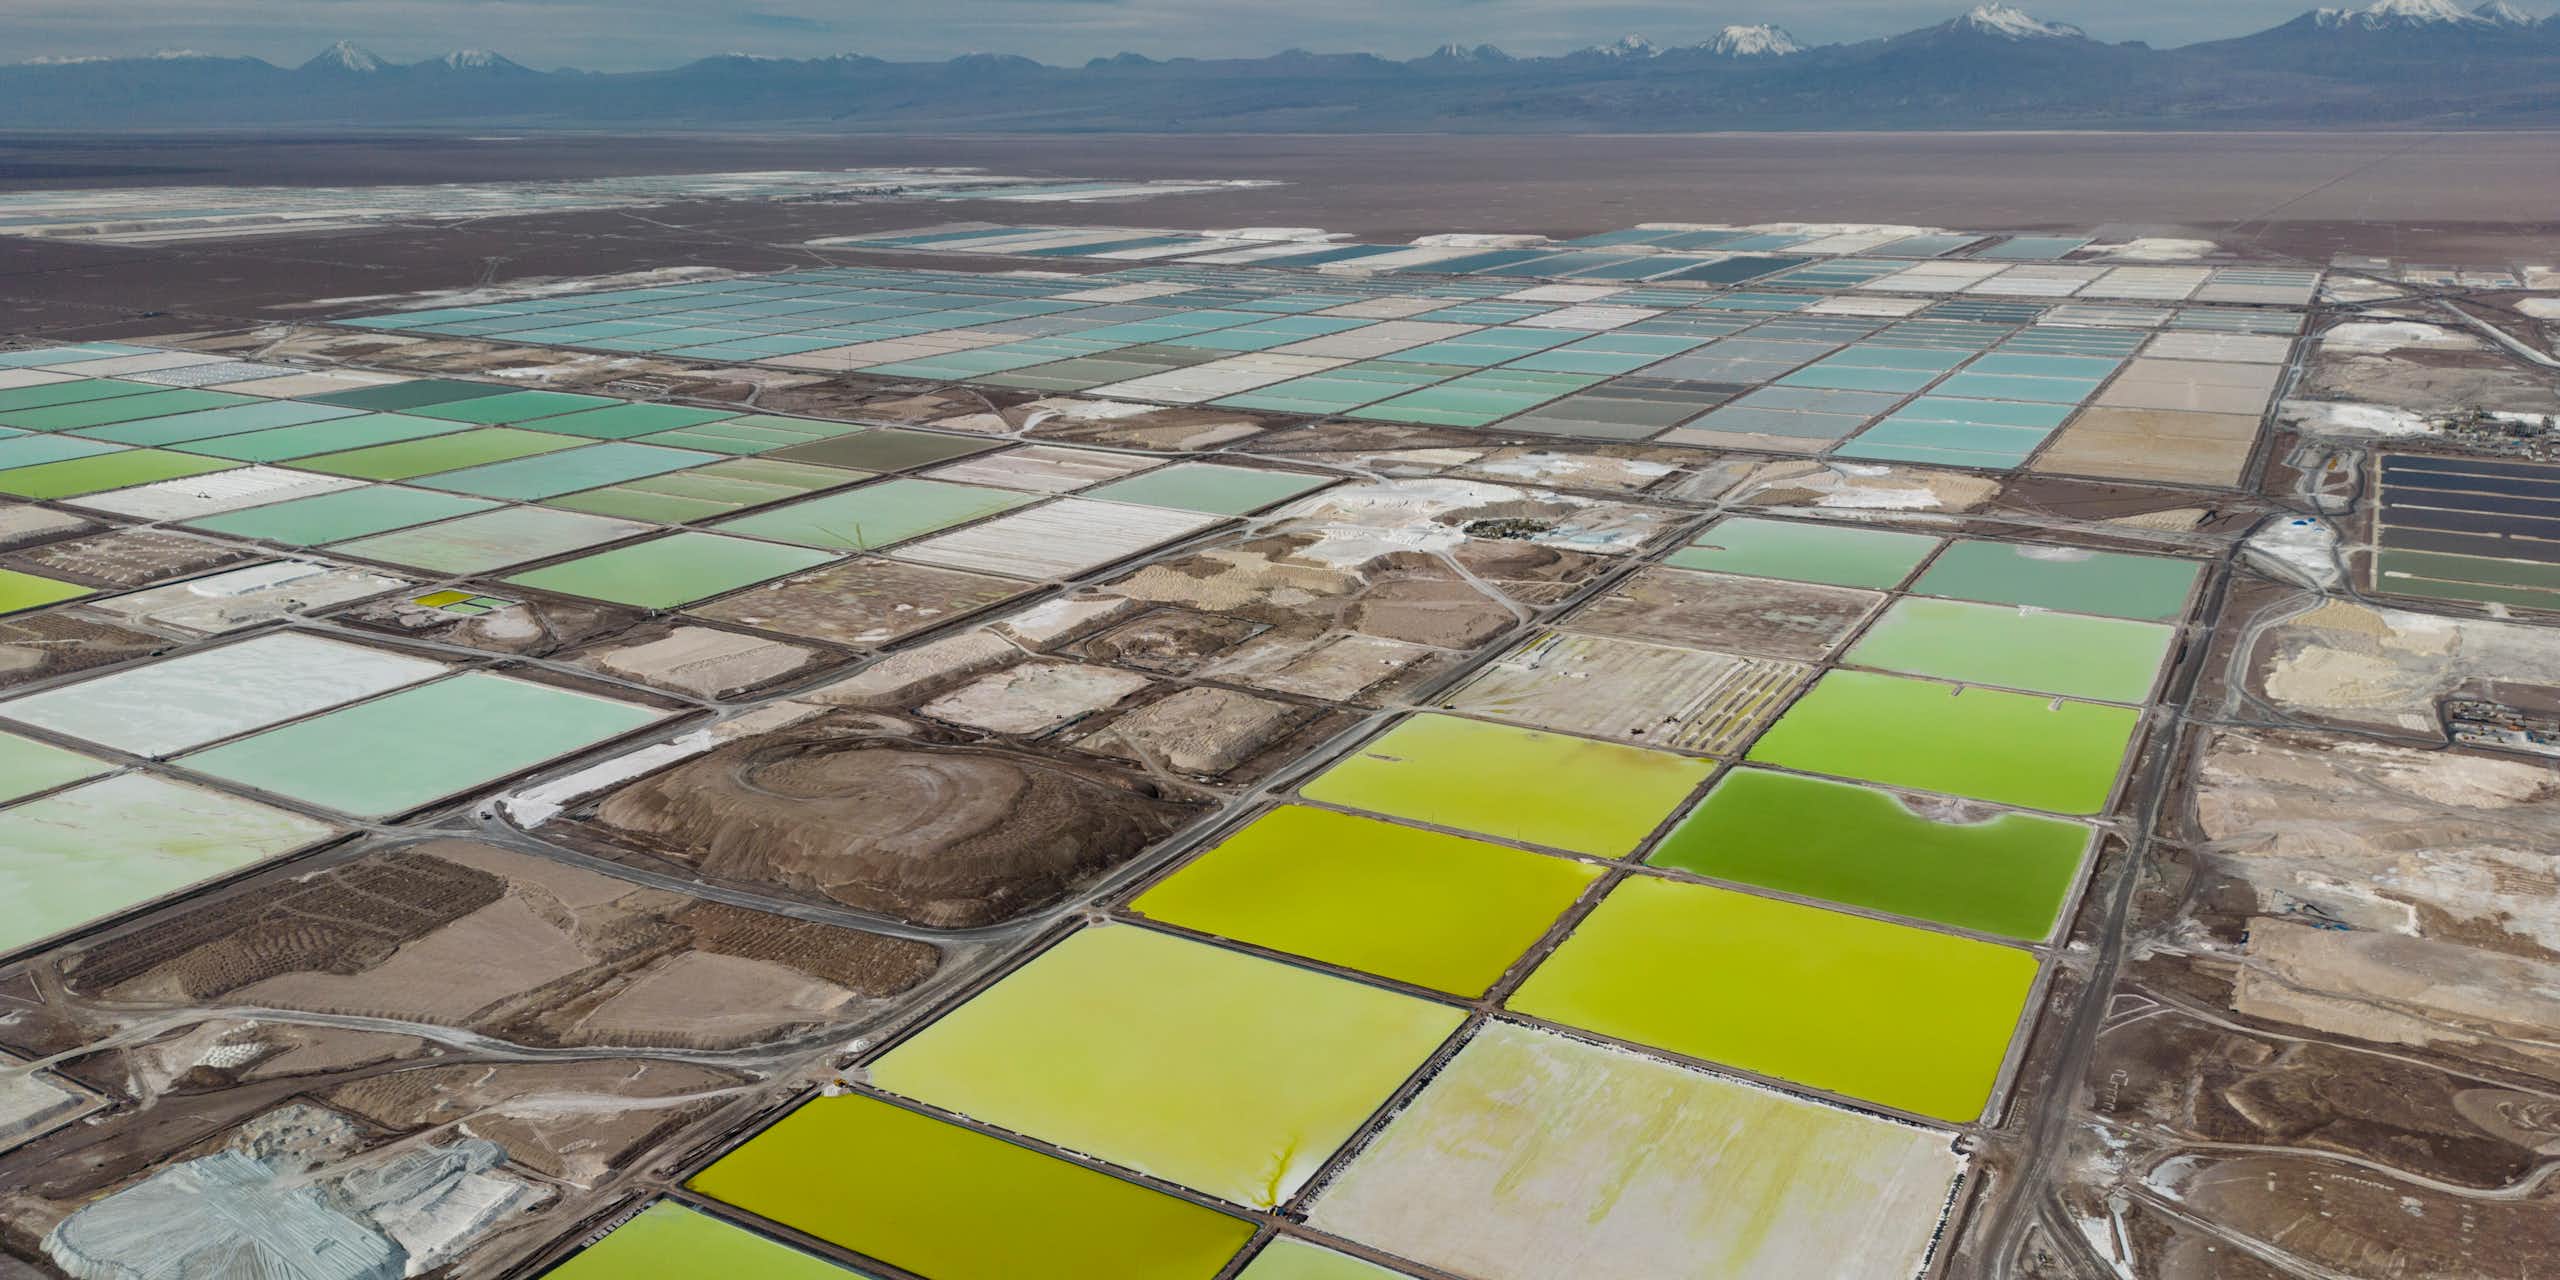 Pools of green and blue liquid is seen in an arid landscape.